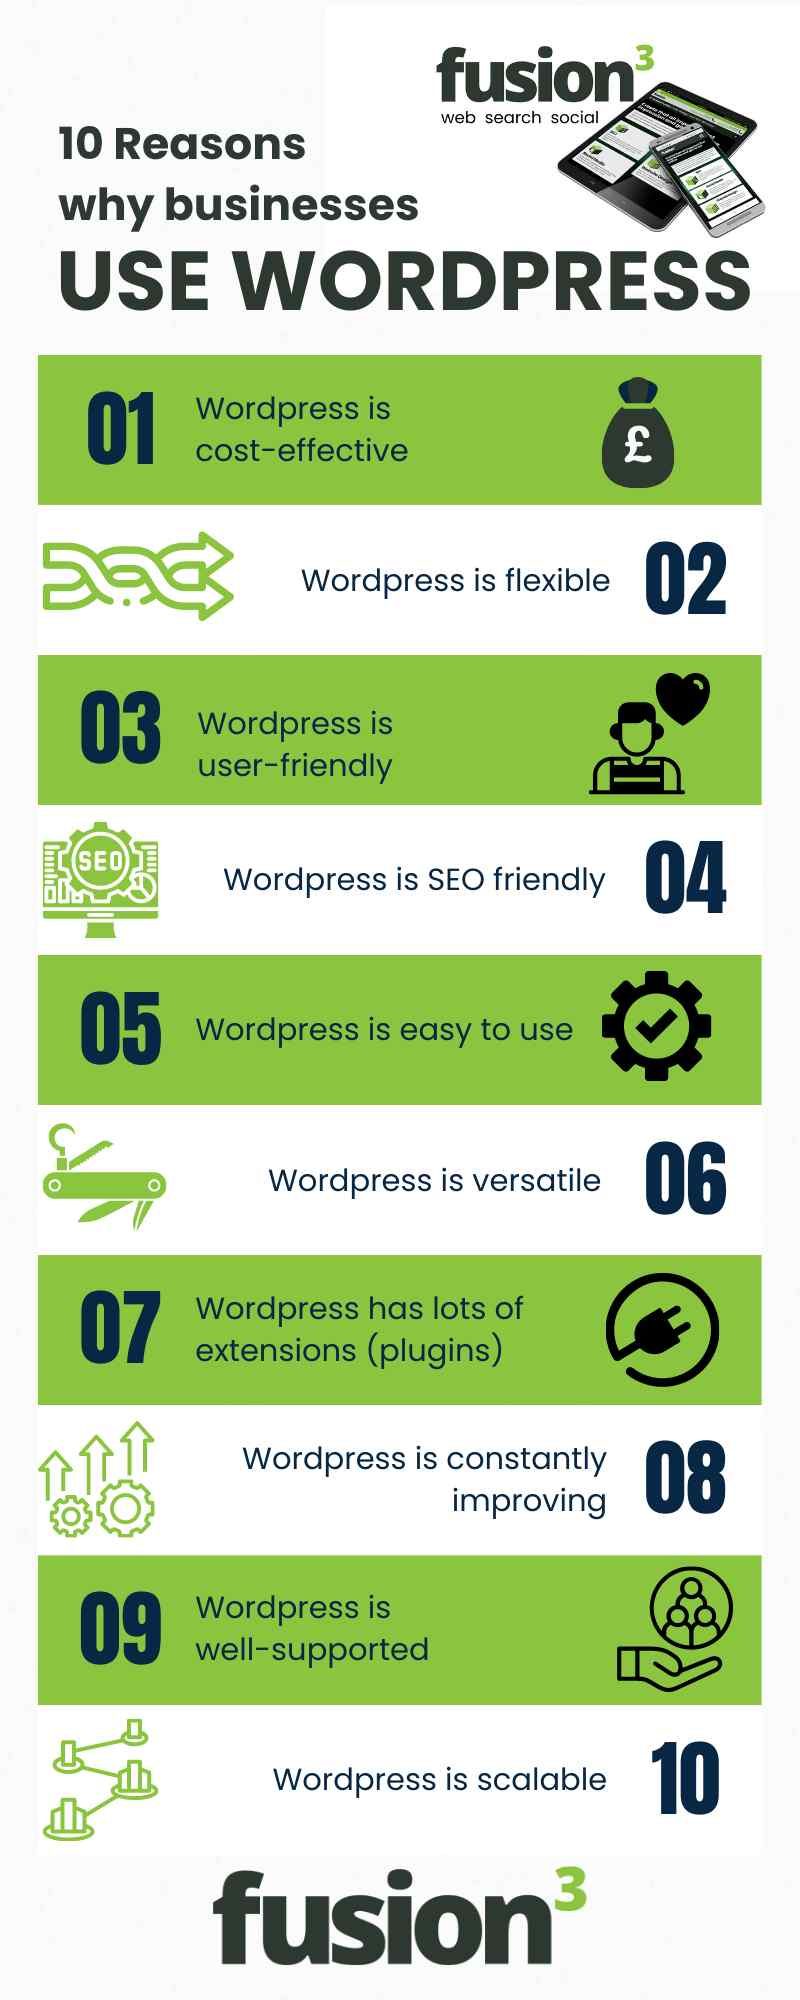 10 Reasons why businesses use WordPress infographic